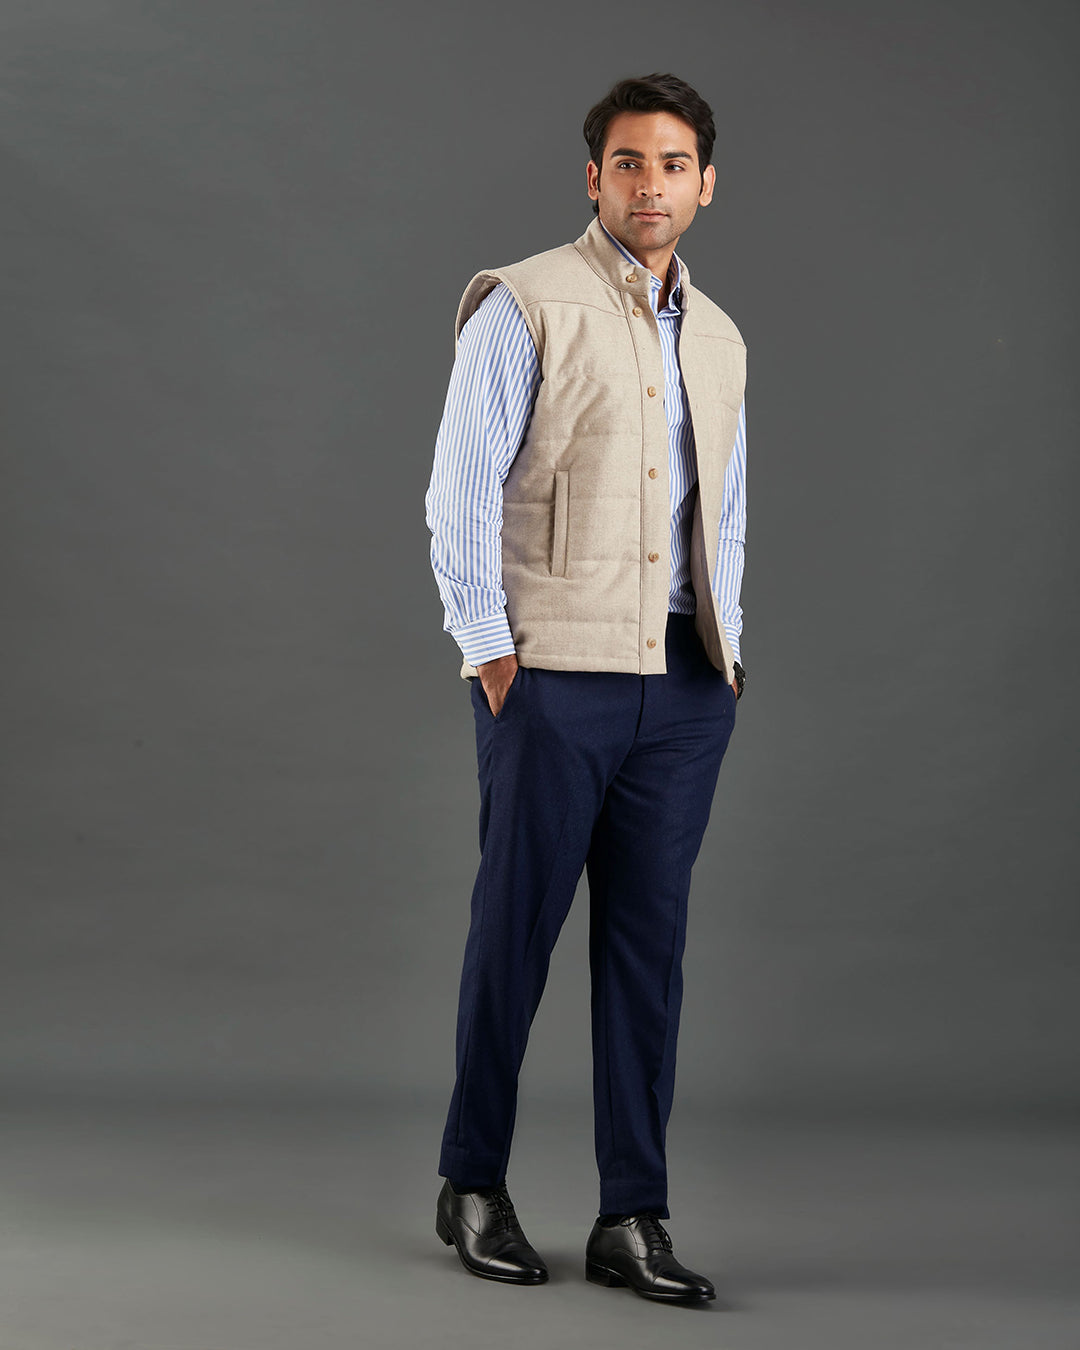 Front of model wearing the flannel quilted vest for men by Luxire in ecru hands in pockets hands in pockets